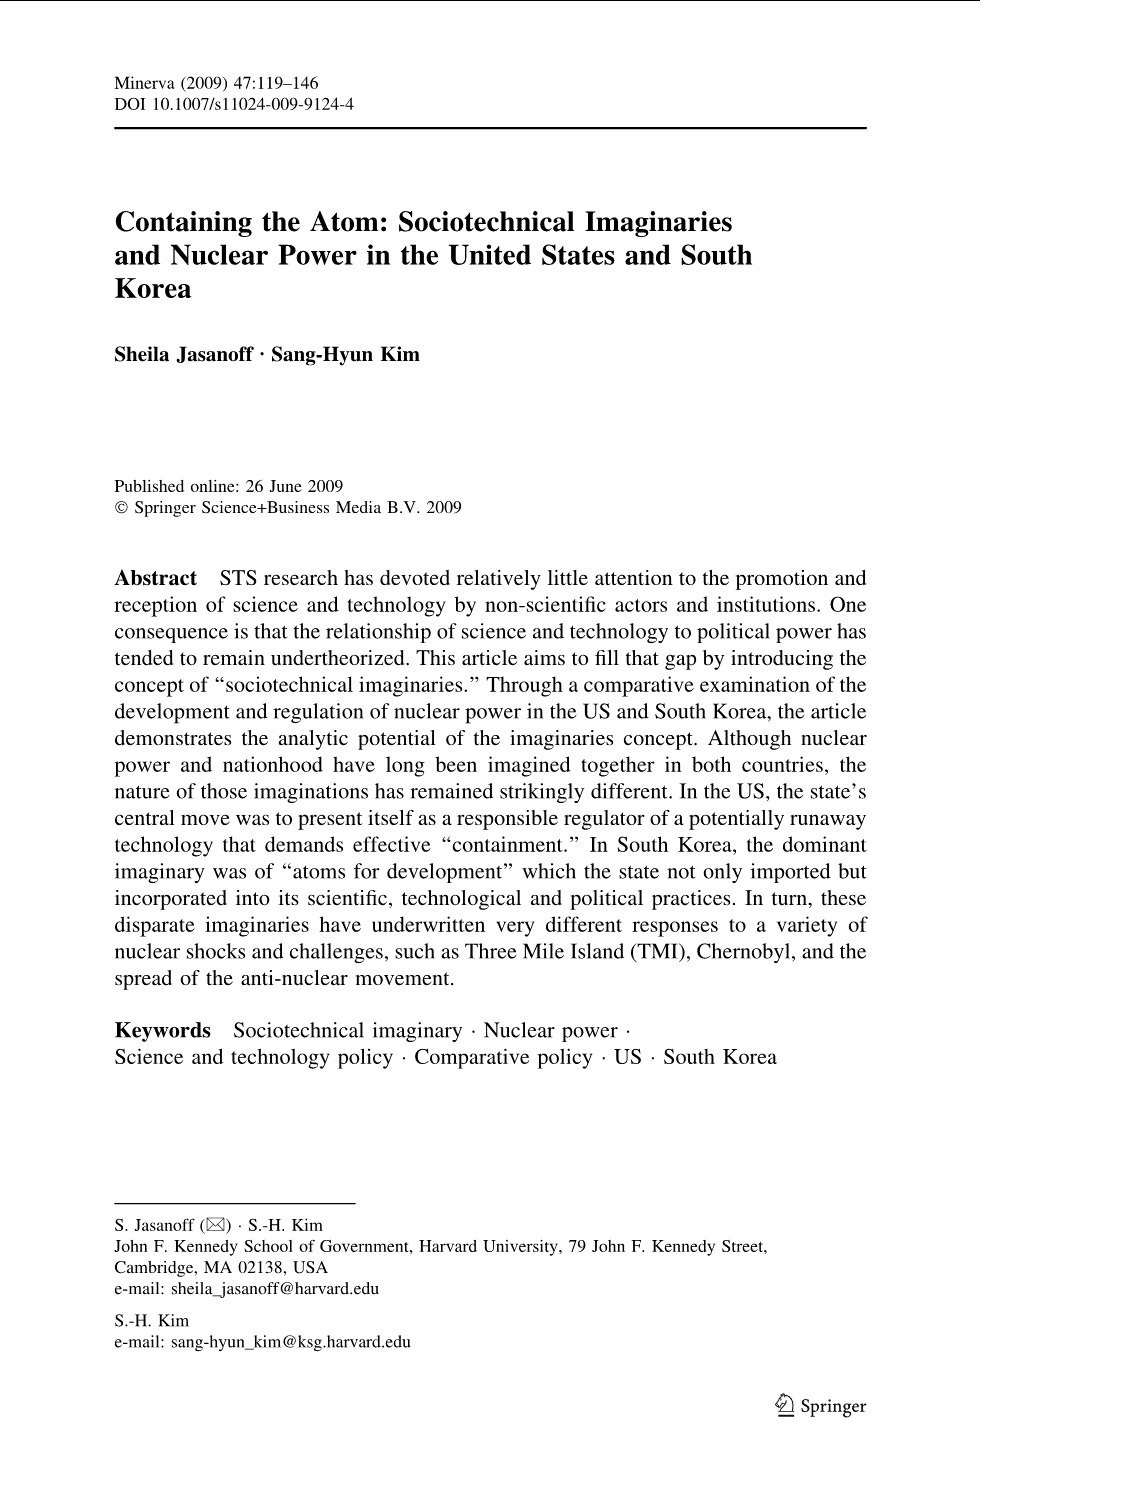 ARTICLE: Containing the Atom: Sociotechnical Imaginaries and Nuclear Power in the United States and South Korea (2009)